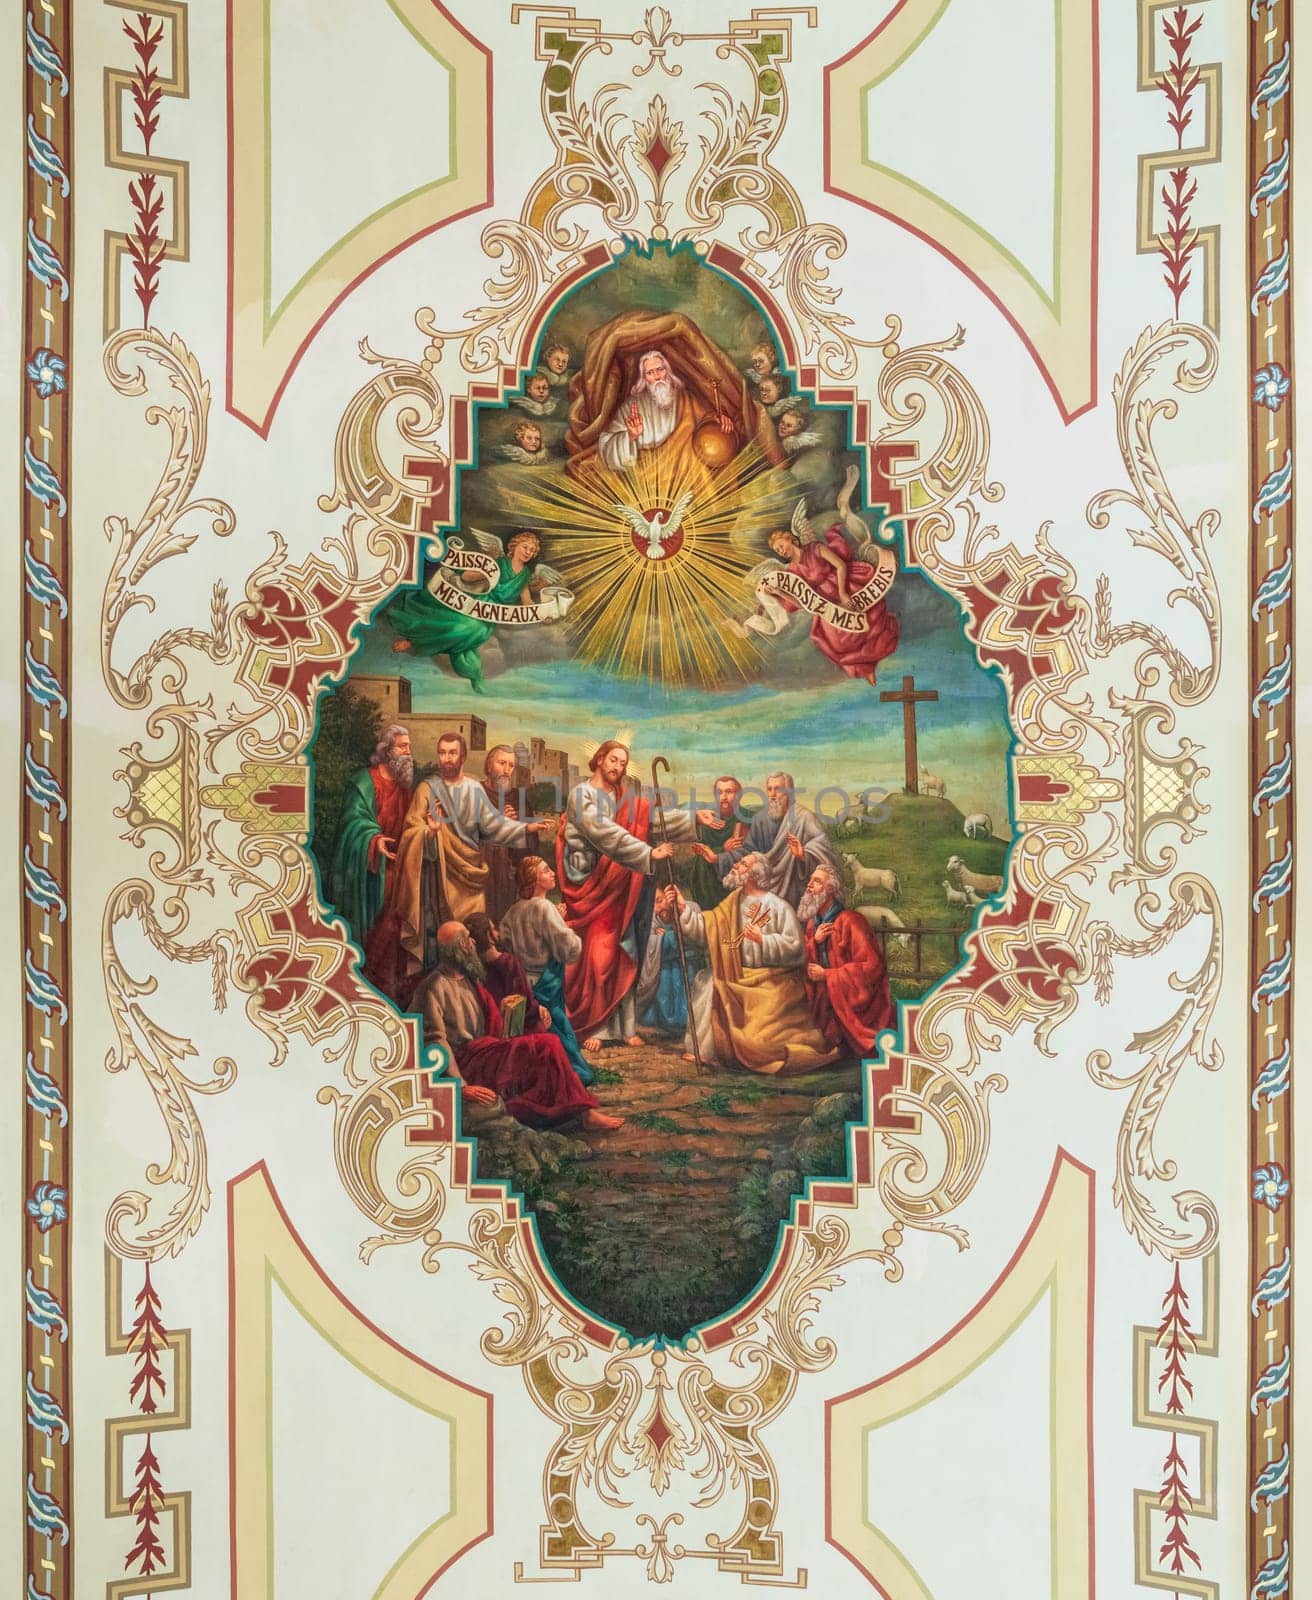 Ceiling painting in the Cathedral Basilica of Saint Louis by steheap